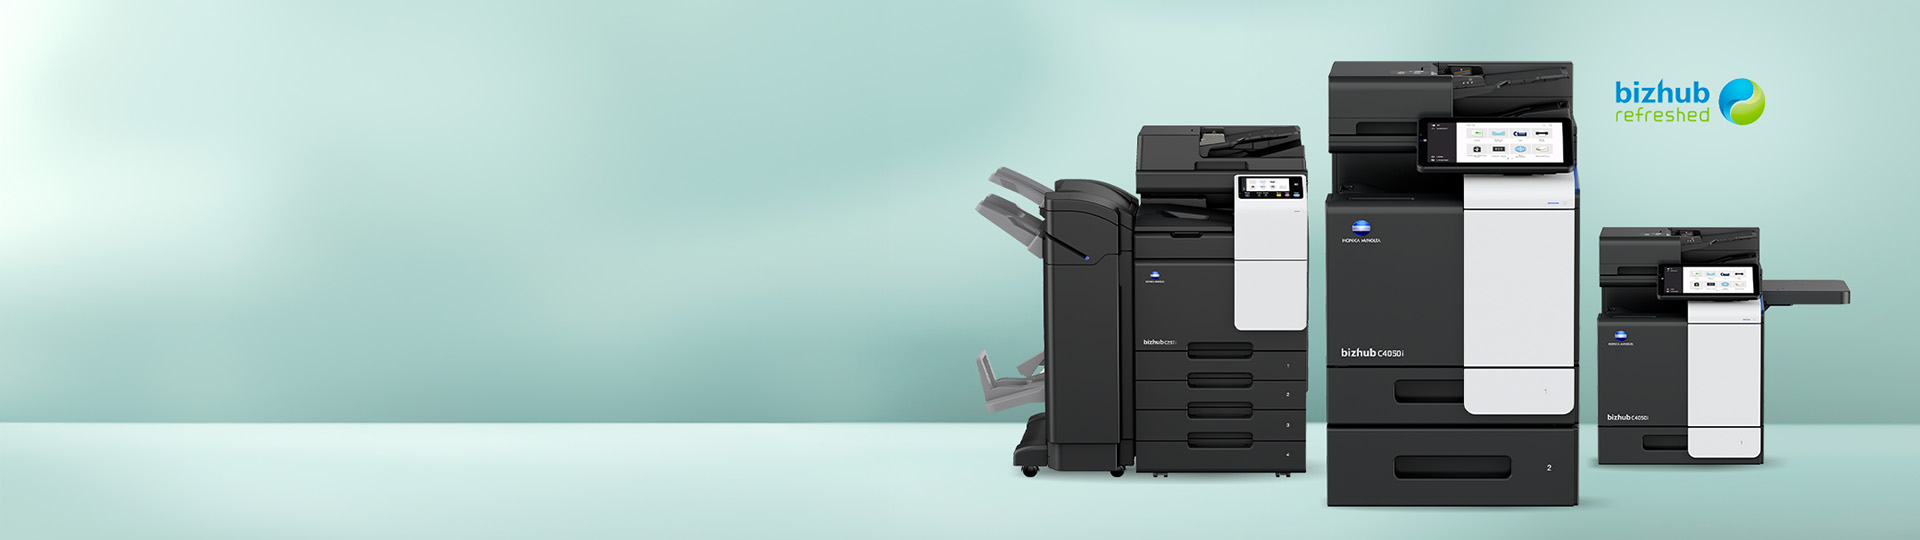 Looking to be eco-friendly? Choose a used bizhub Refreshed printer.